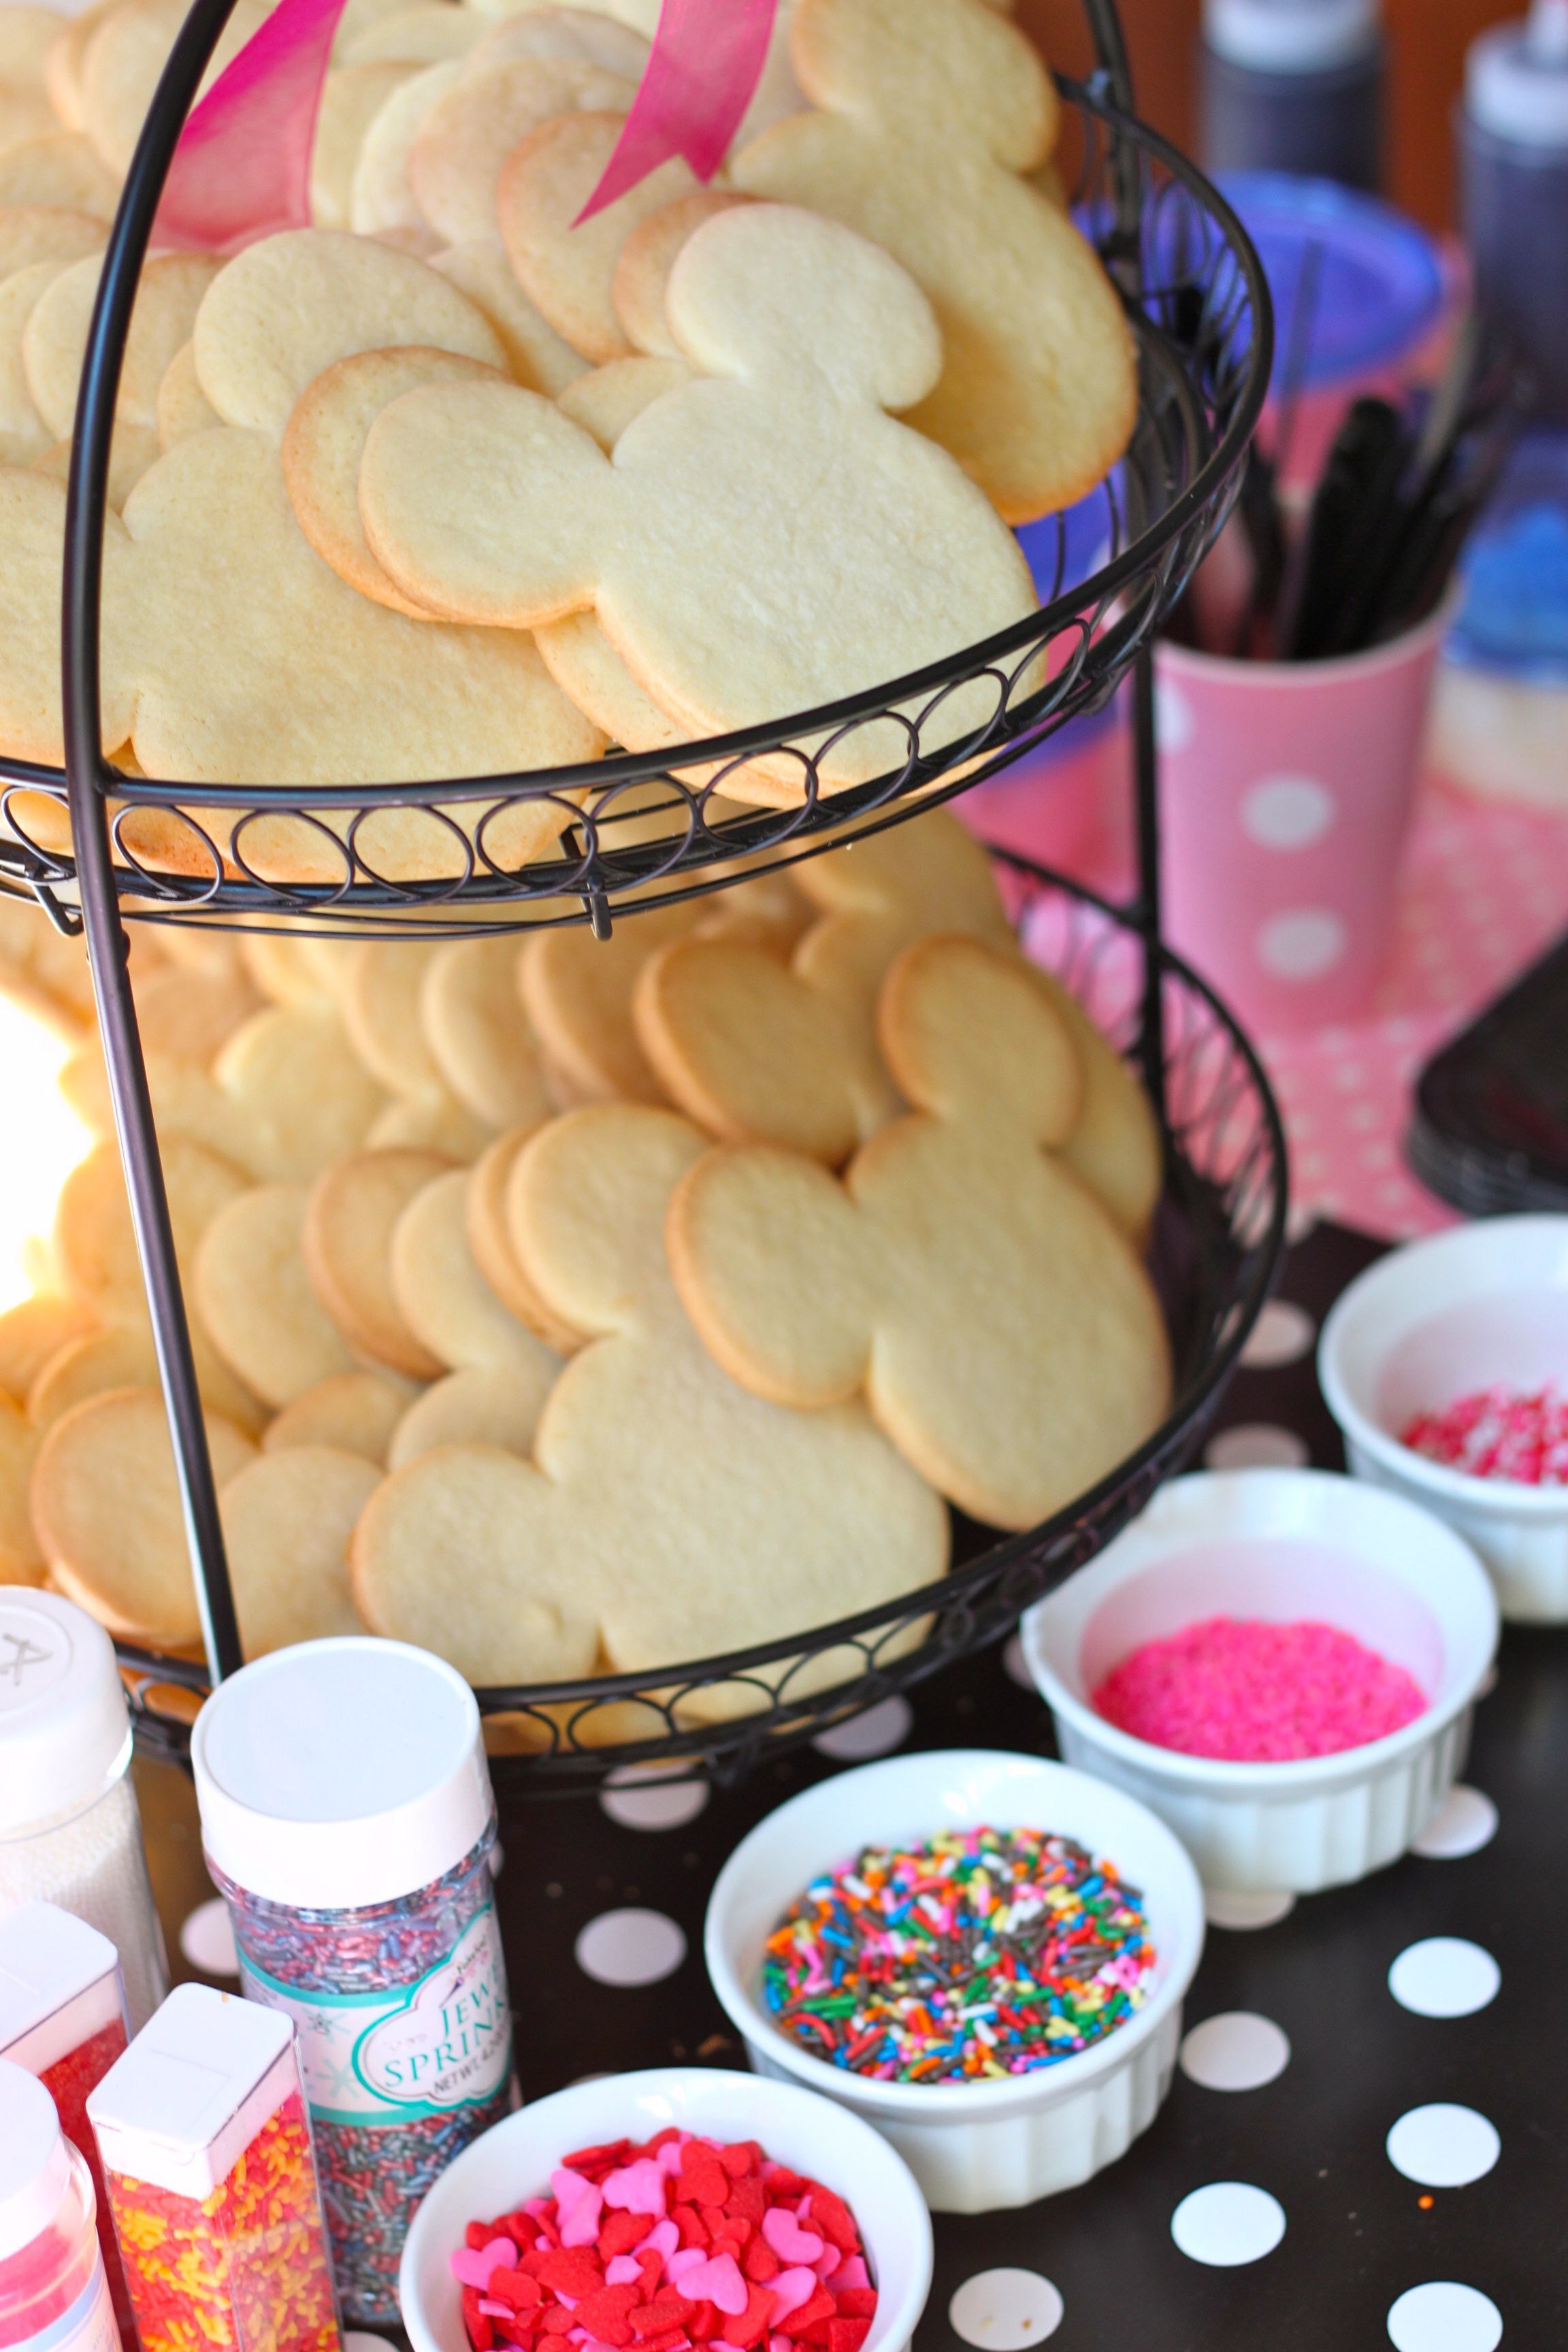 Decorate you own sugar cookies. Very cute Minnie Mouse-theme party.